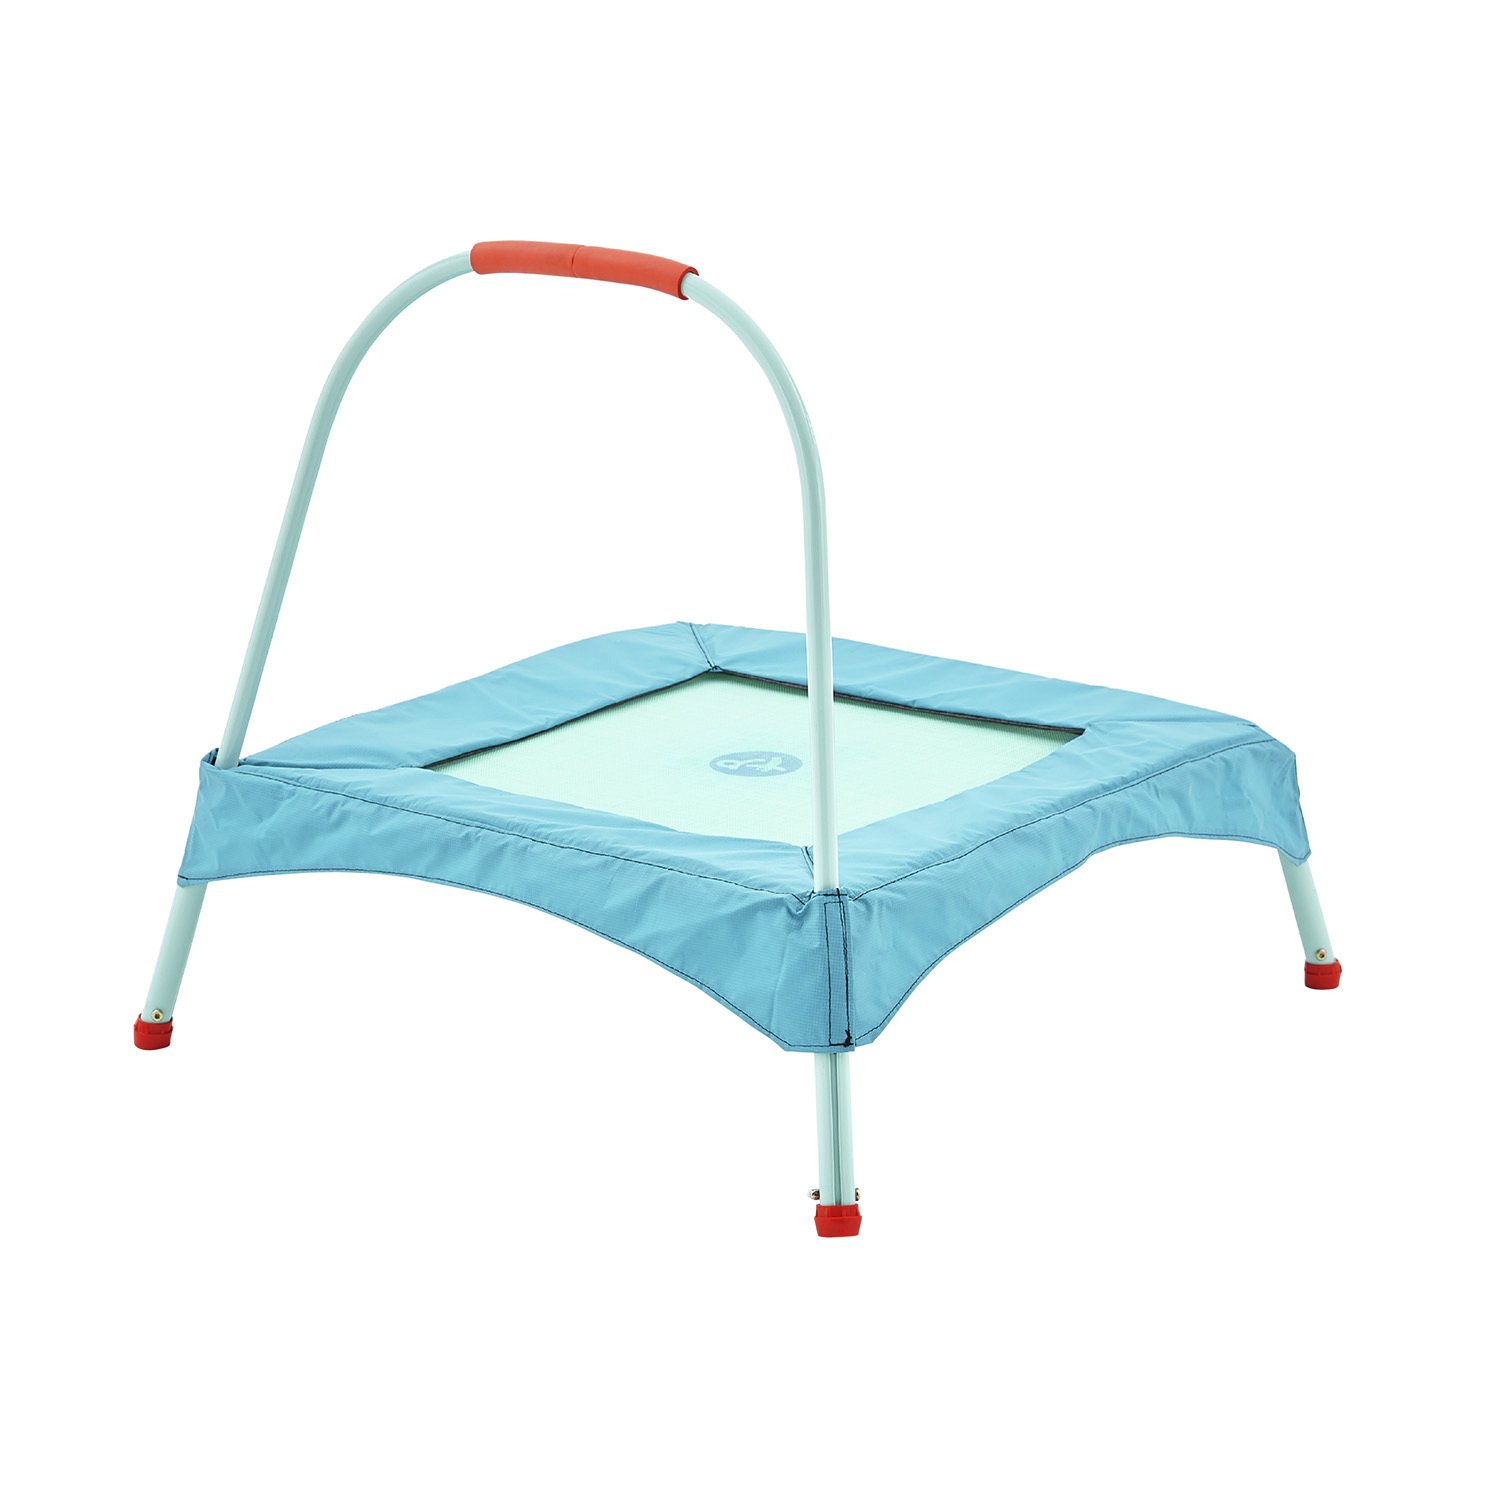 Mookie Early Fun 3ft Toddler Trampoline - Green